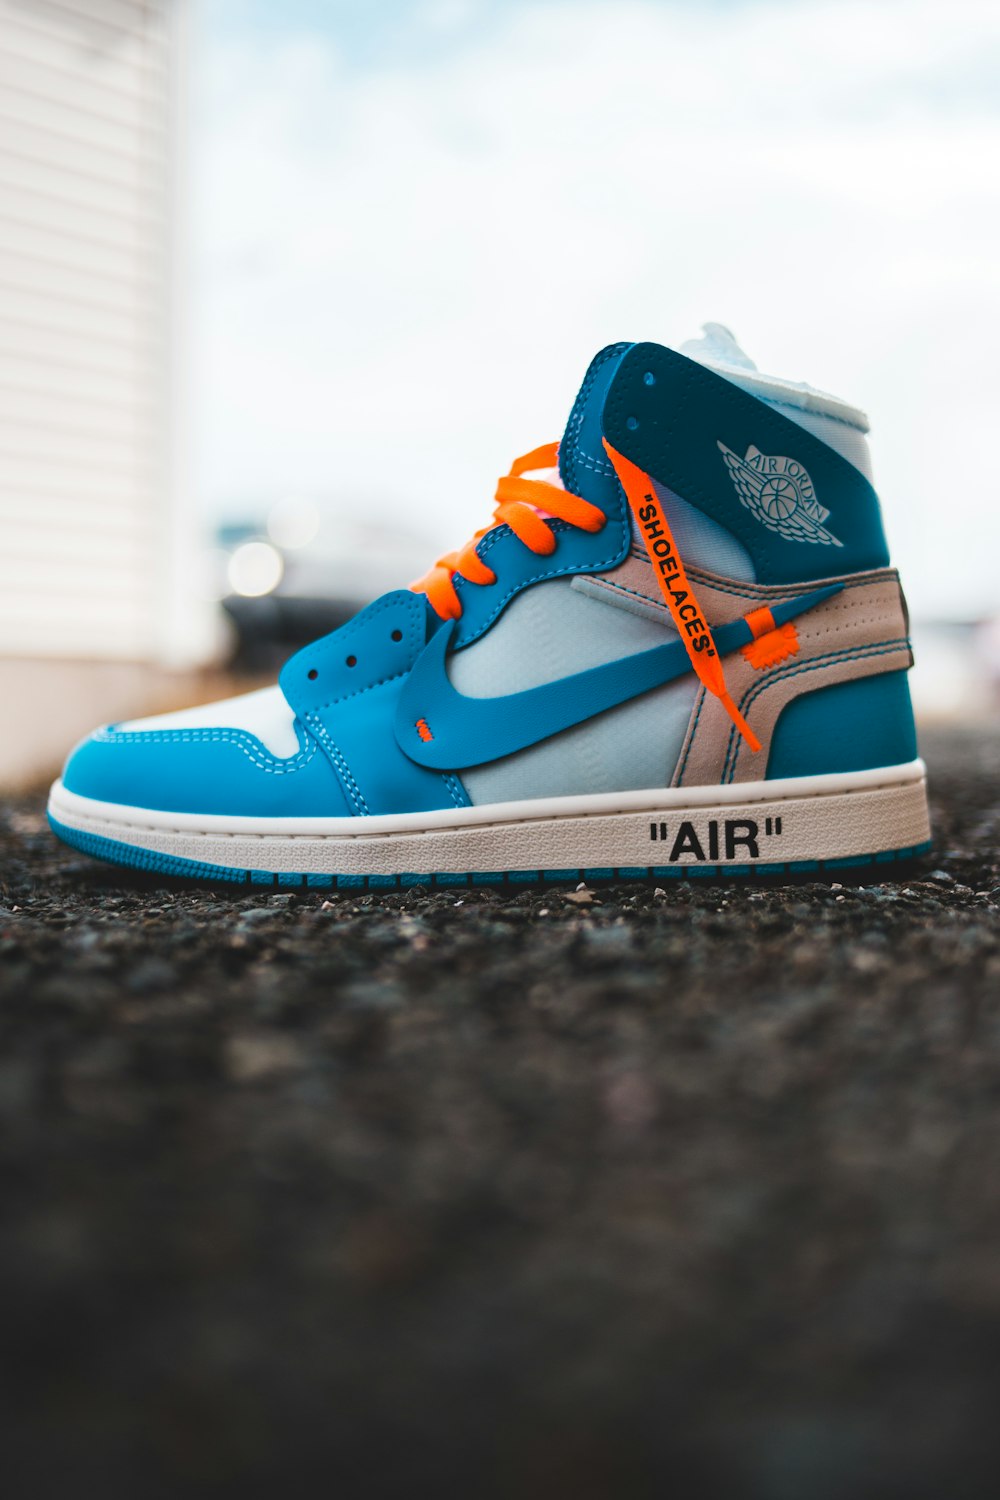 Blue and orange nike high top sneakers photo – Free Shoe Image on